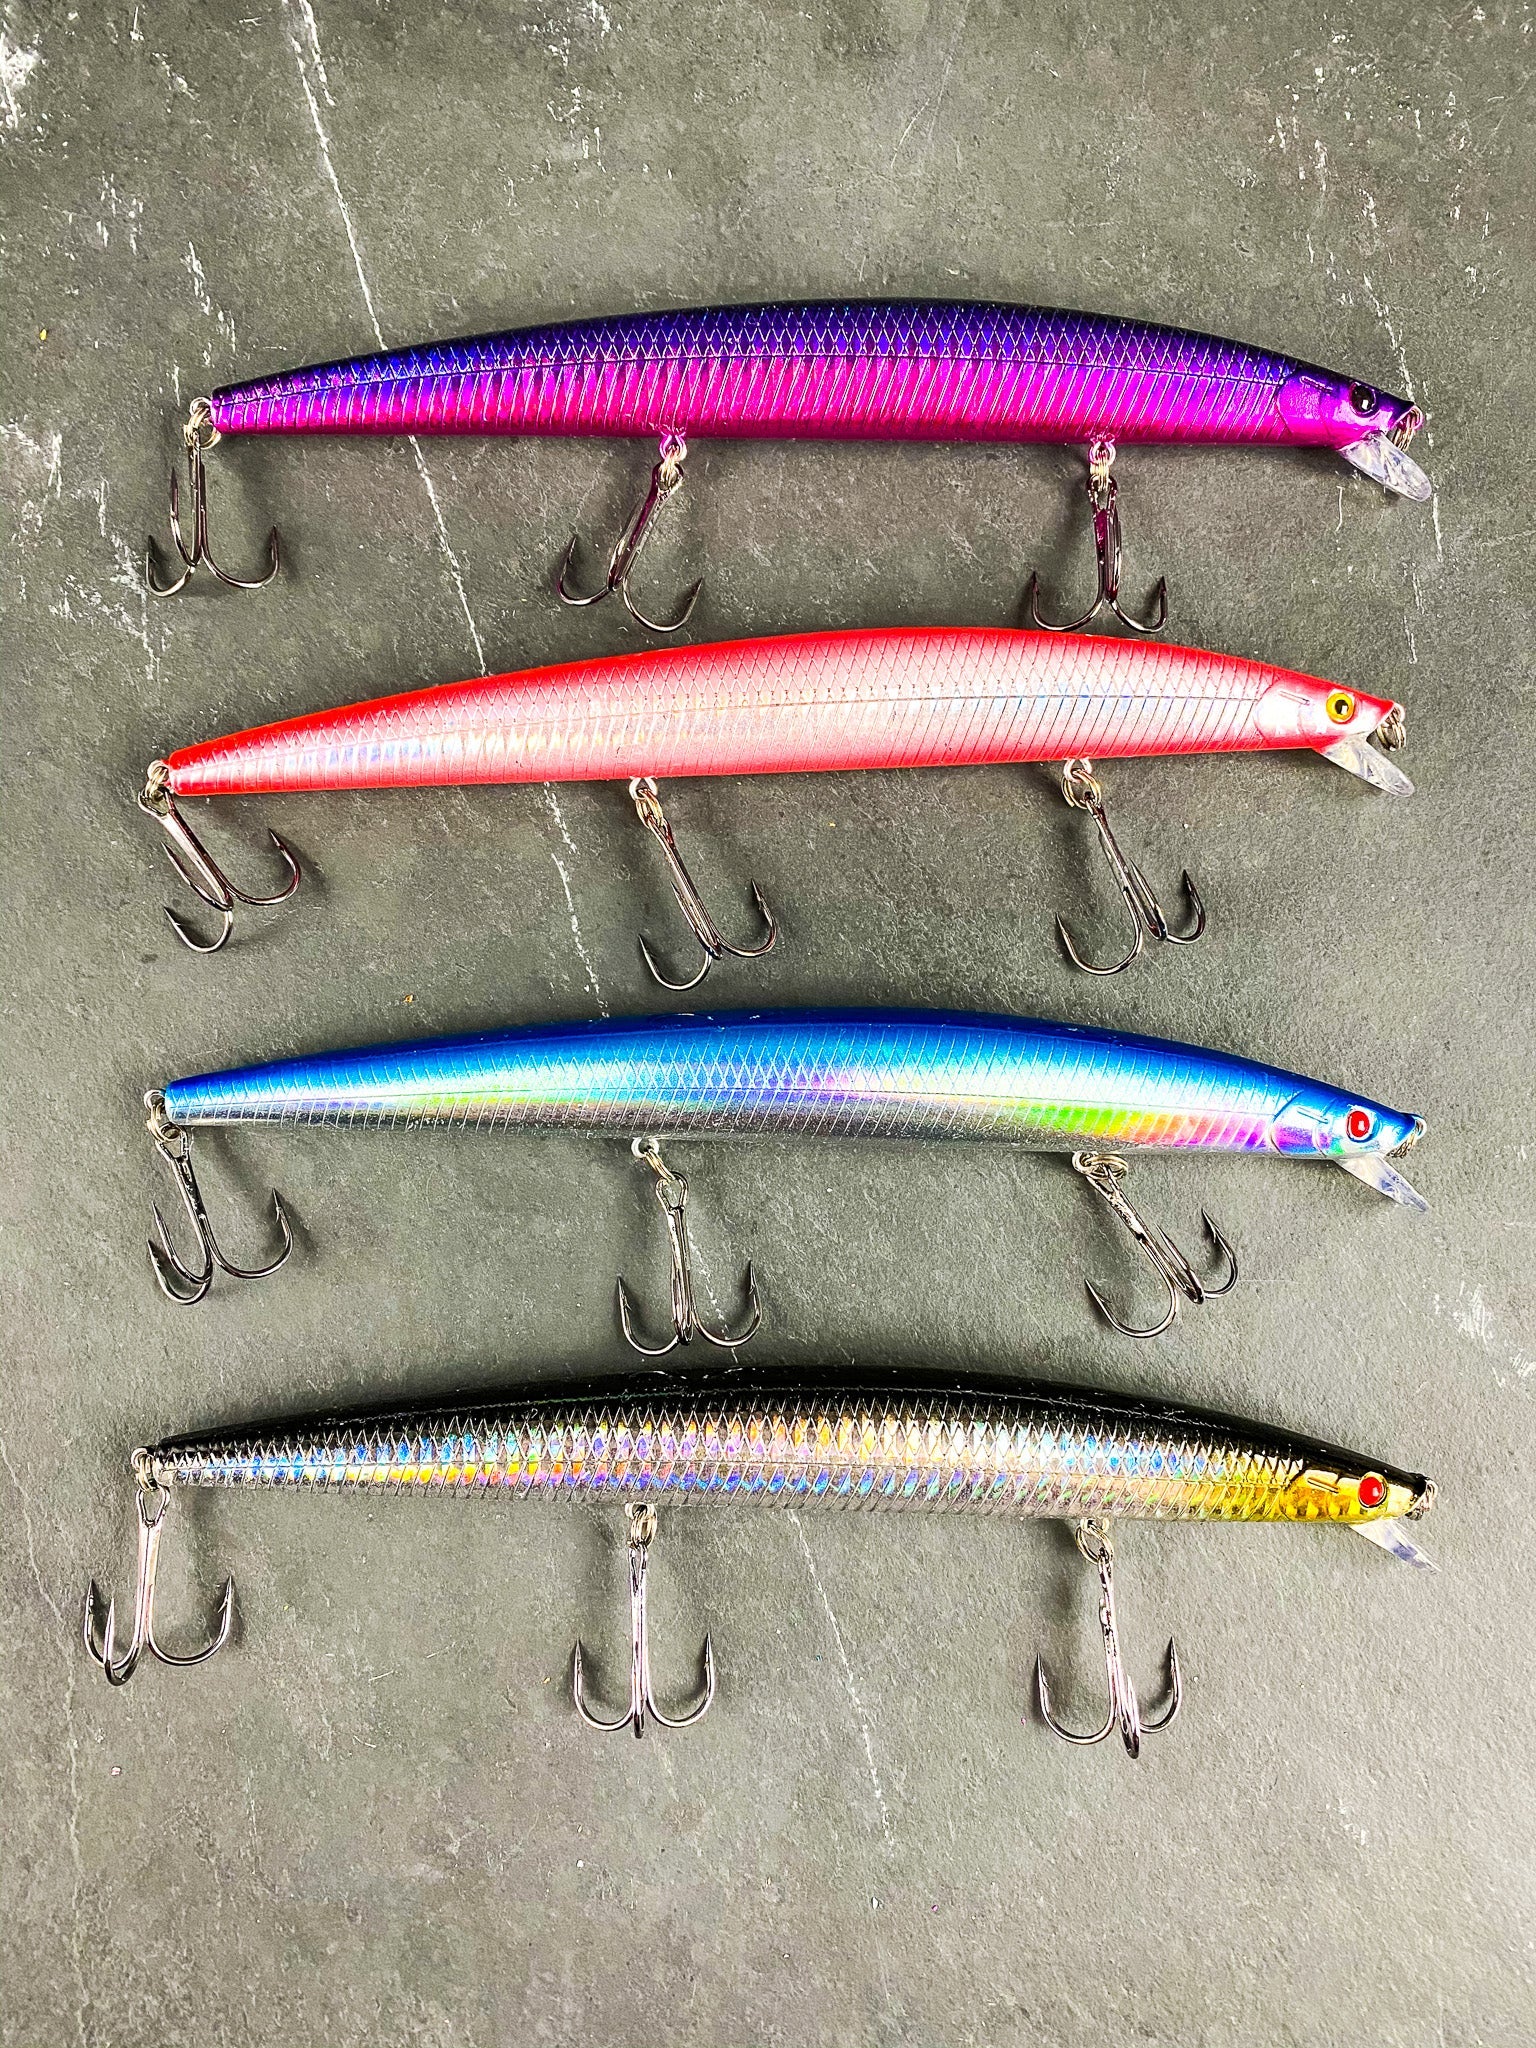 Muskie Fishing Lures - Catch Trophy Muskie with Outdoor Junction